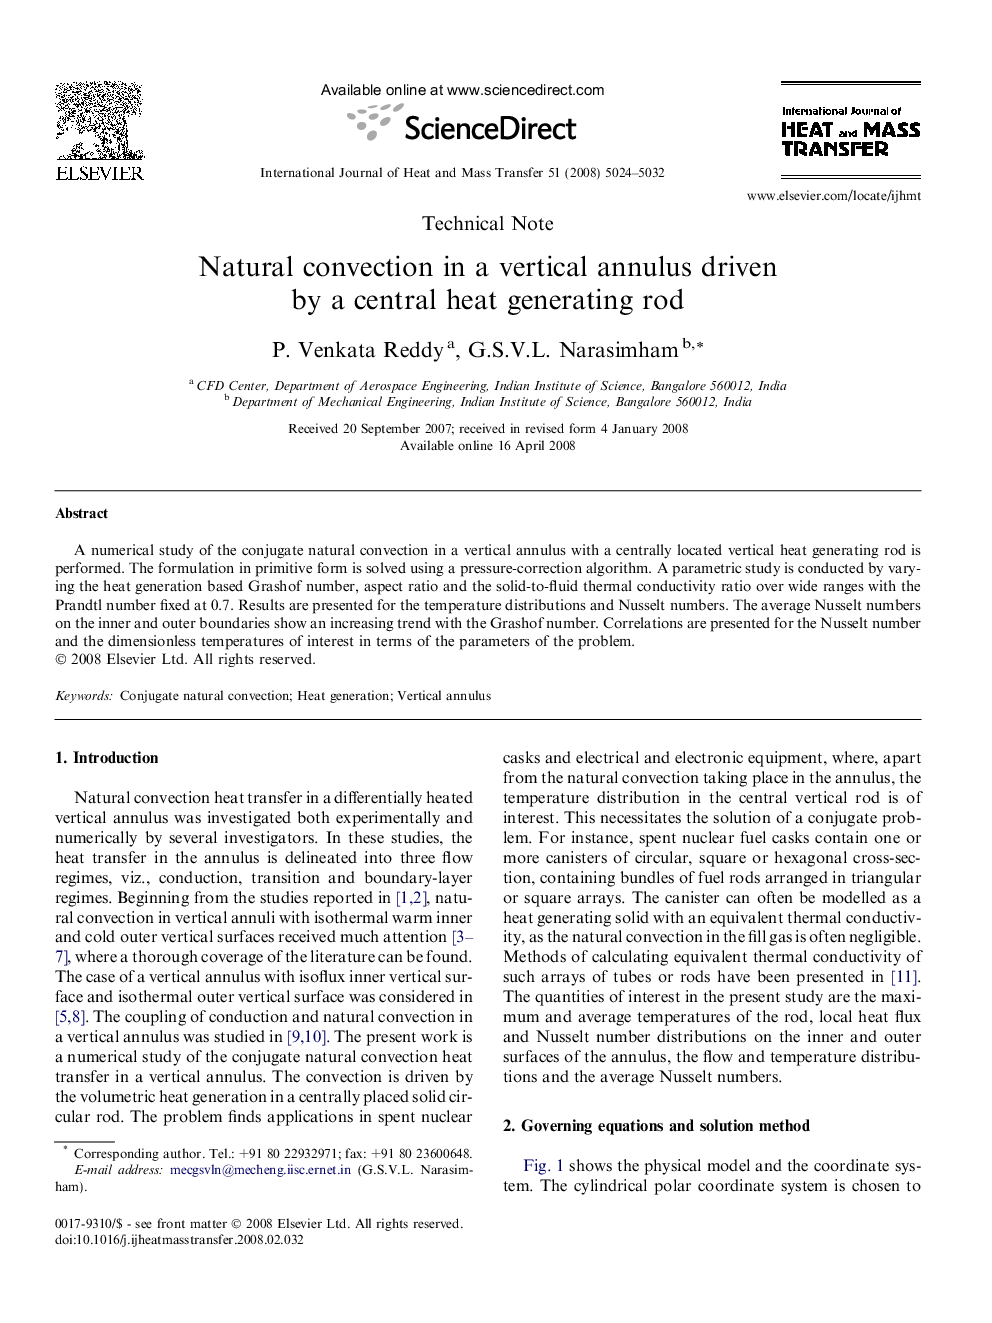 Natural convection in a vertical annulus driven by a central heat generating rod